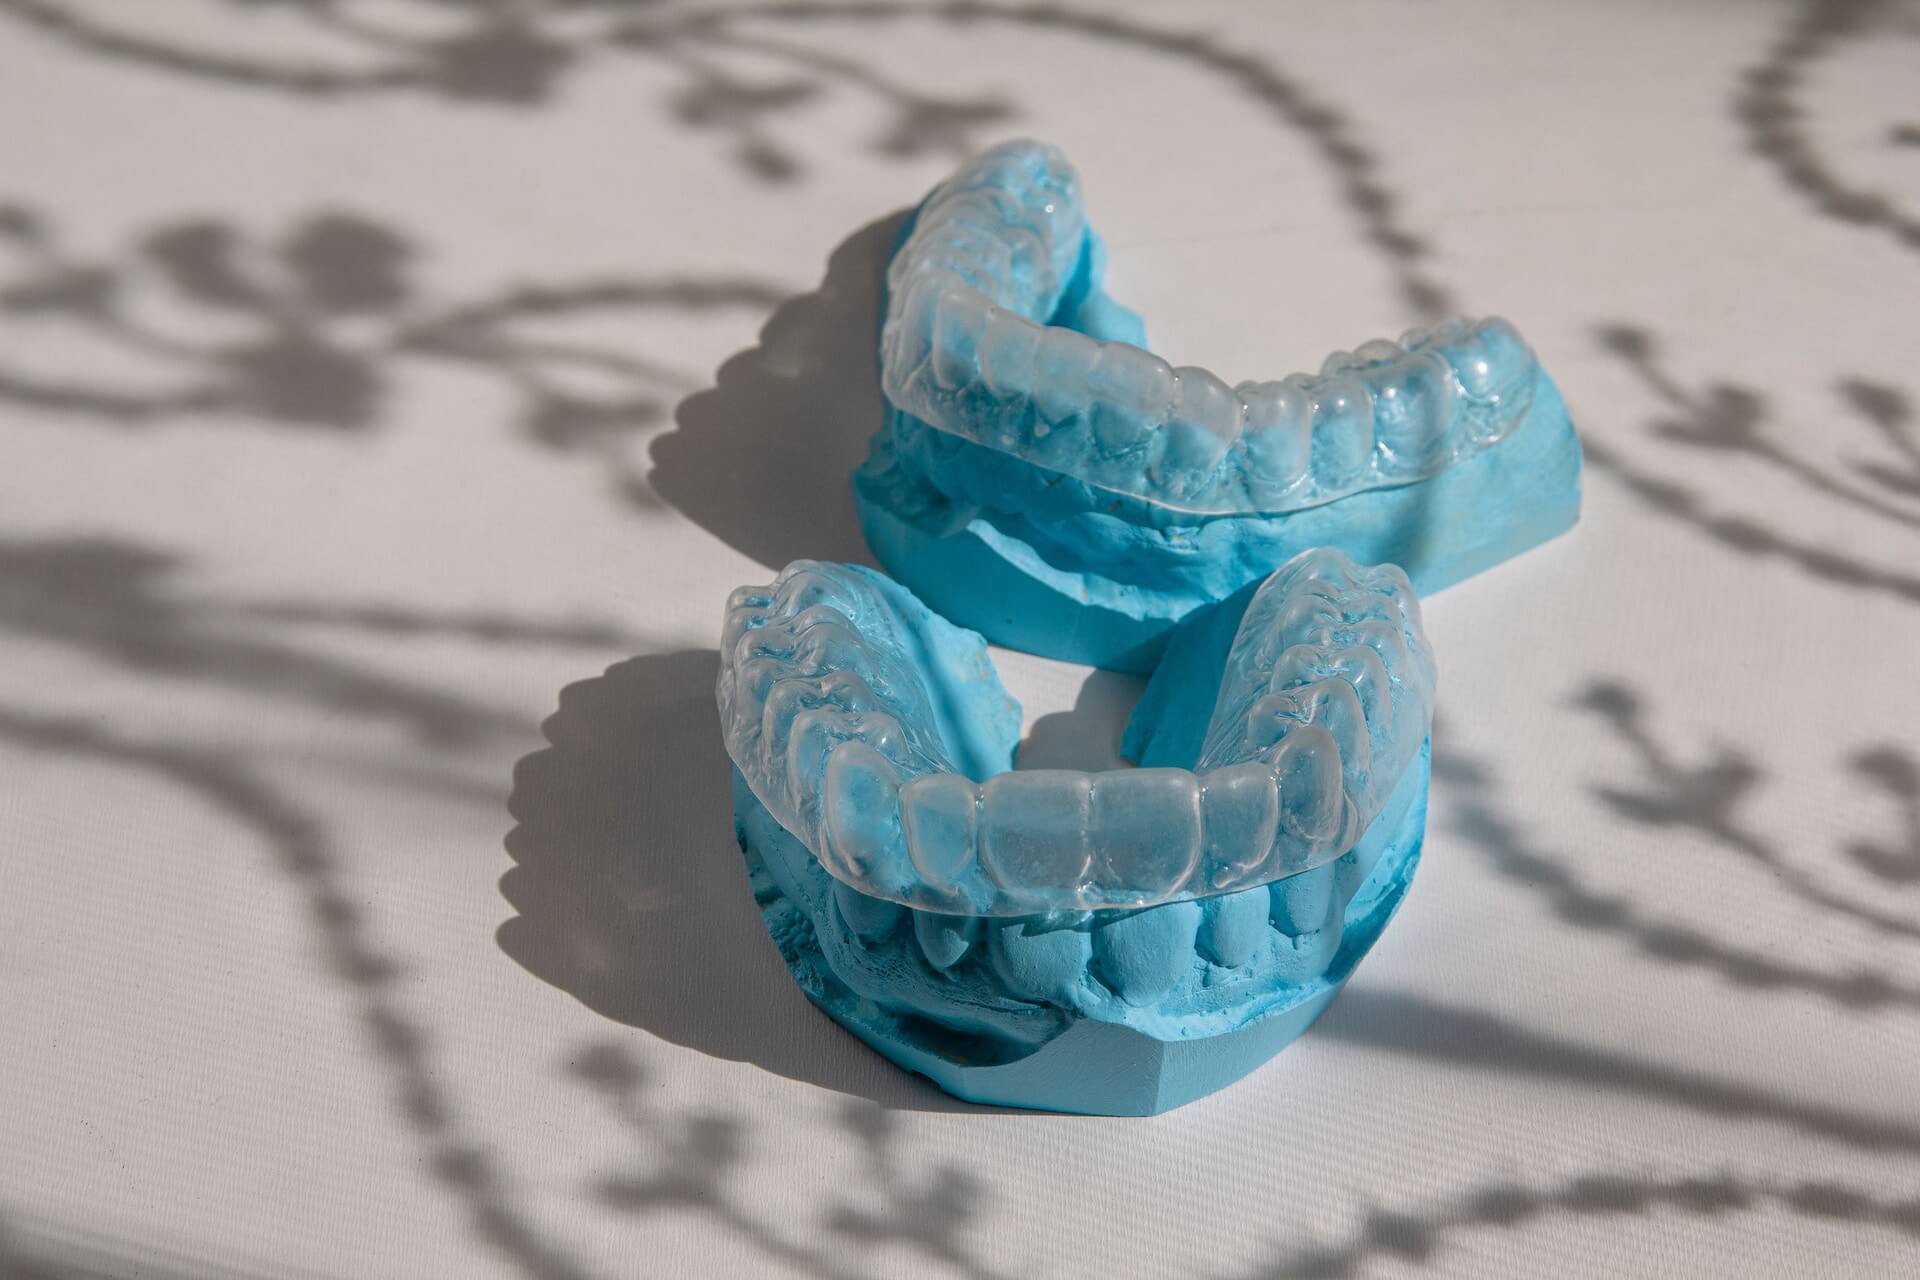 Invisalign mould to show people if Invisalign is worth it